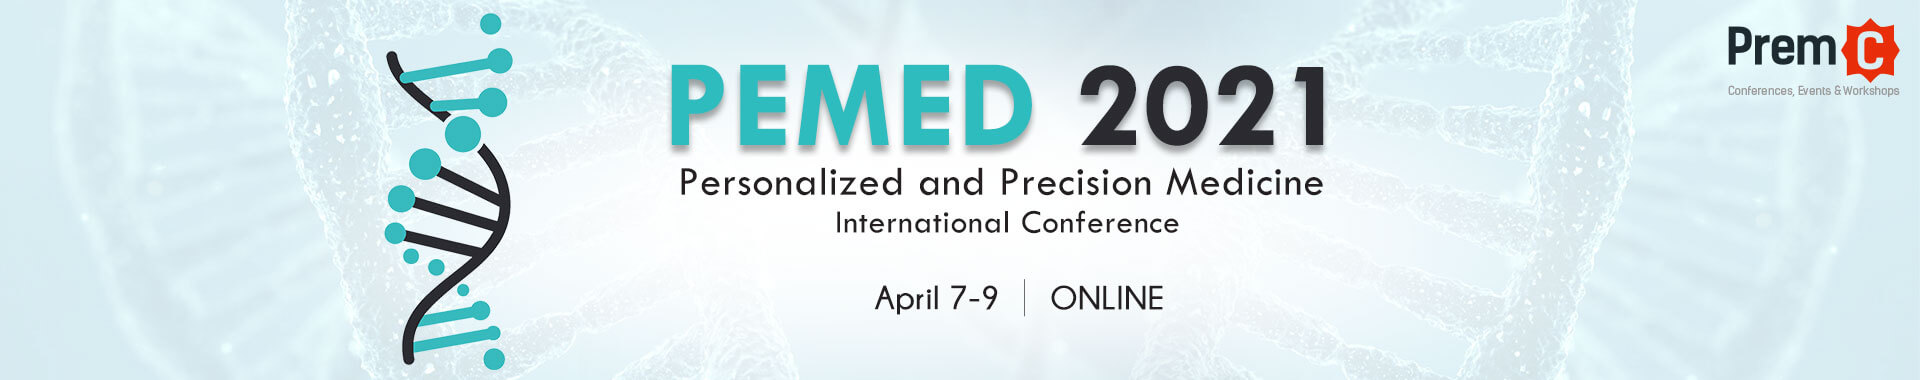 Personalized and precision medicine international conference - PEMED 2018